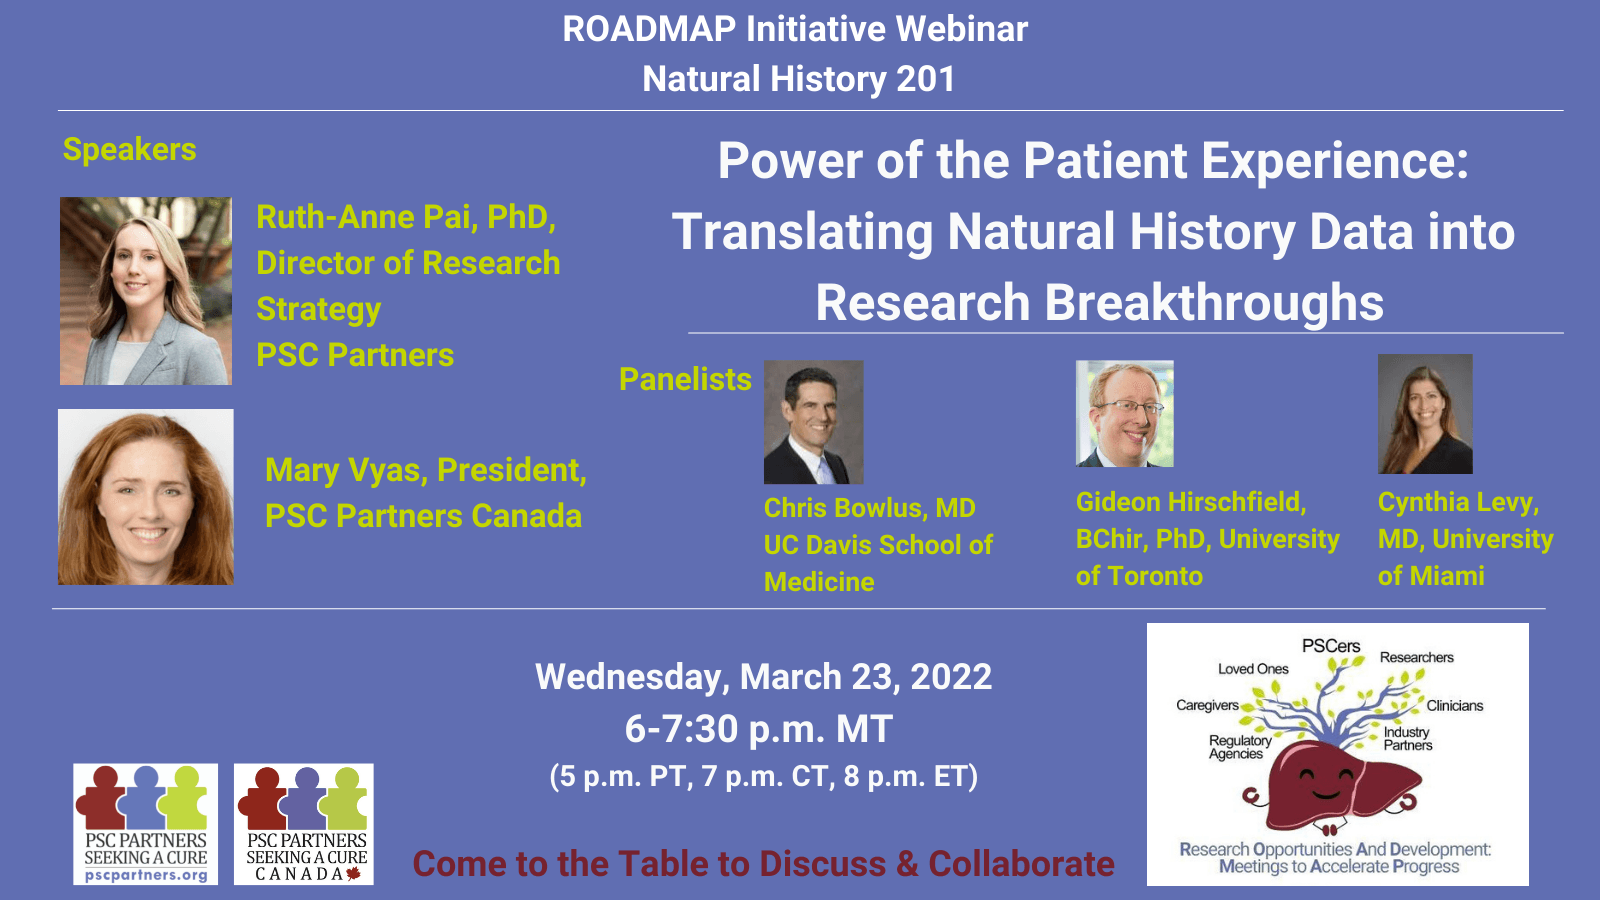 ROADMAP Natural History 201 - Power of the Patient Experience: Translating Natural History Data into Research Breakthroughs